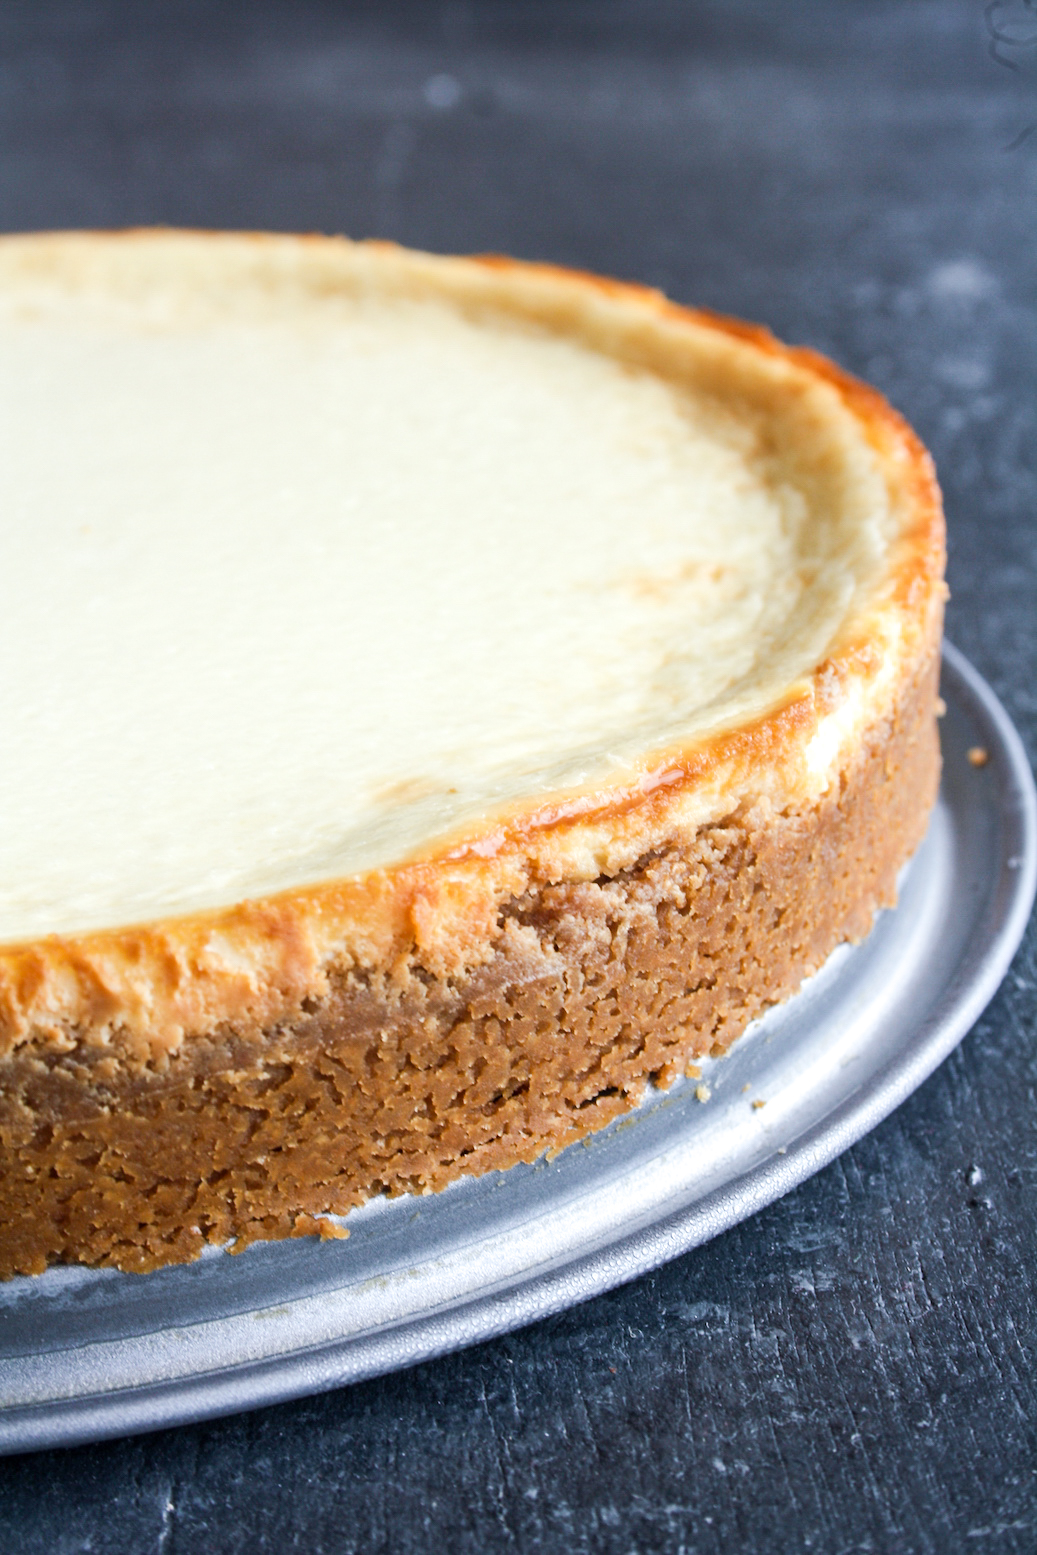 Classic, creamy, tangy New York baked cheesecake with a buttery biscuit base